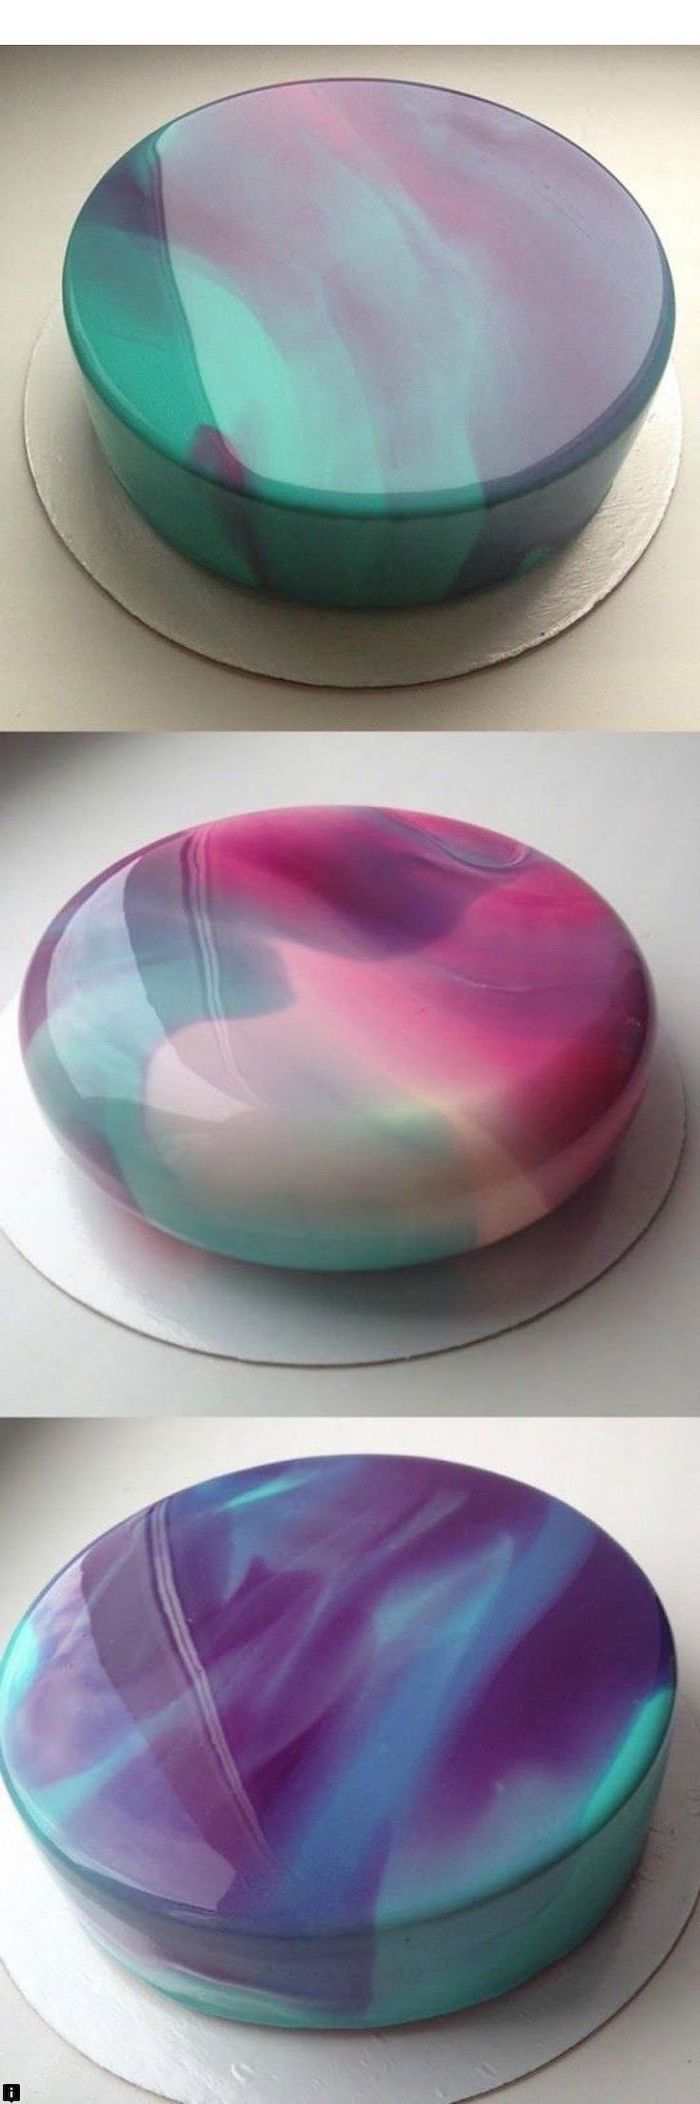 photo collage of three one tier cakes, covered with mirror glaze in different colors, galaxy mirror cake